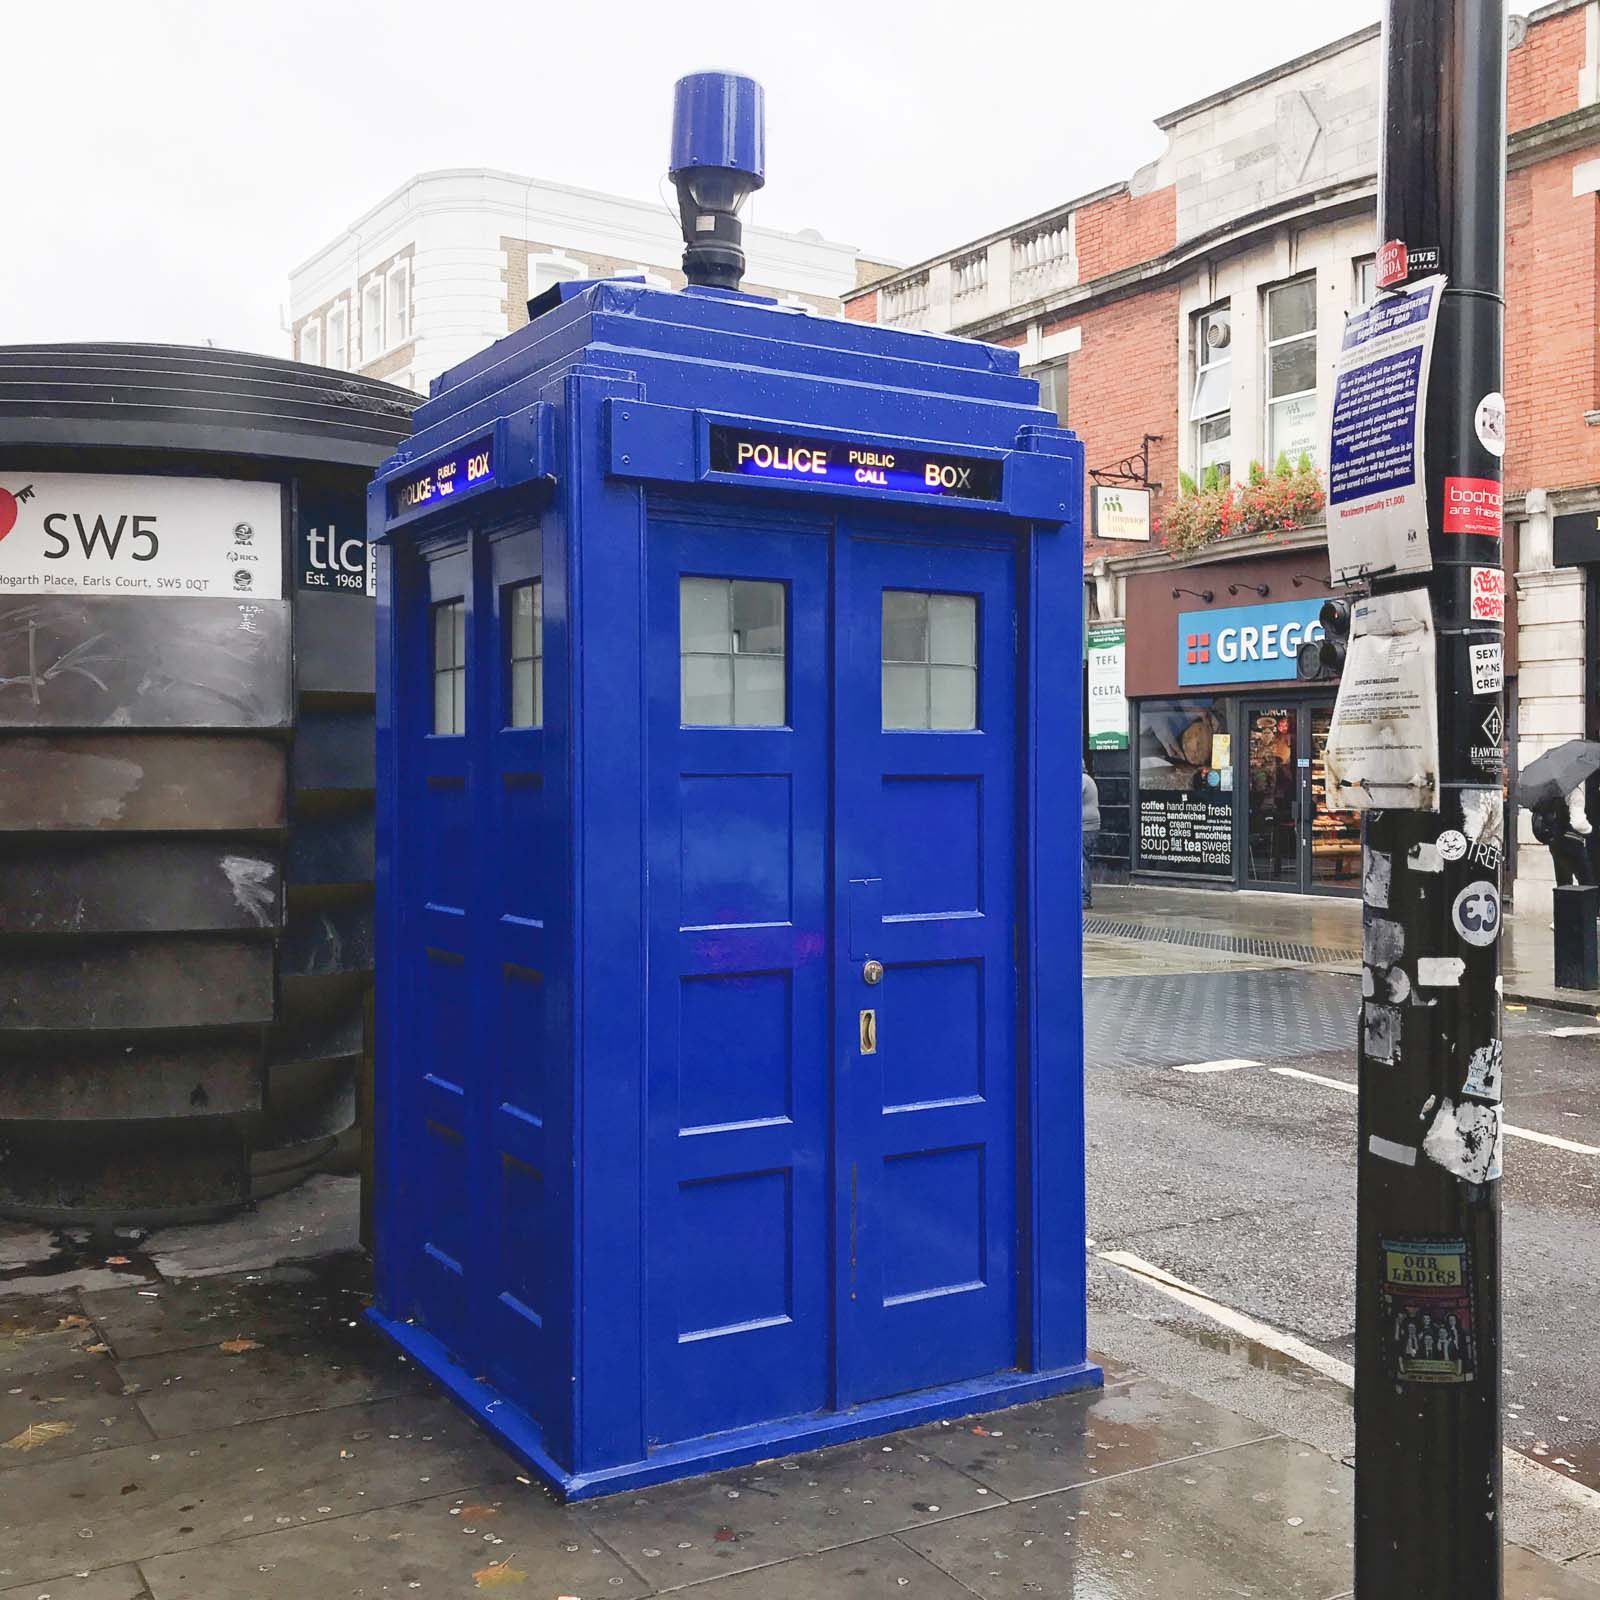 dr who police box